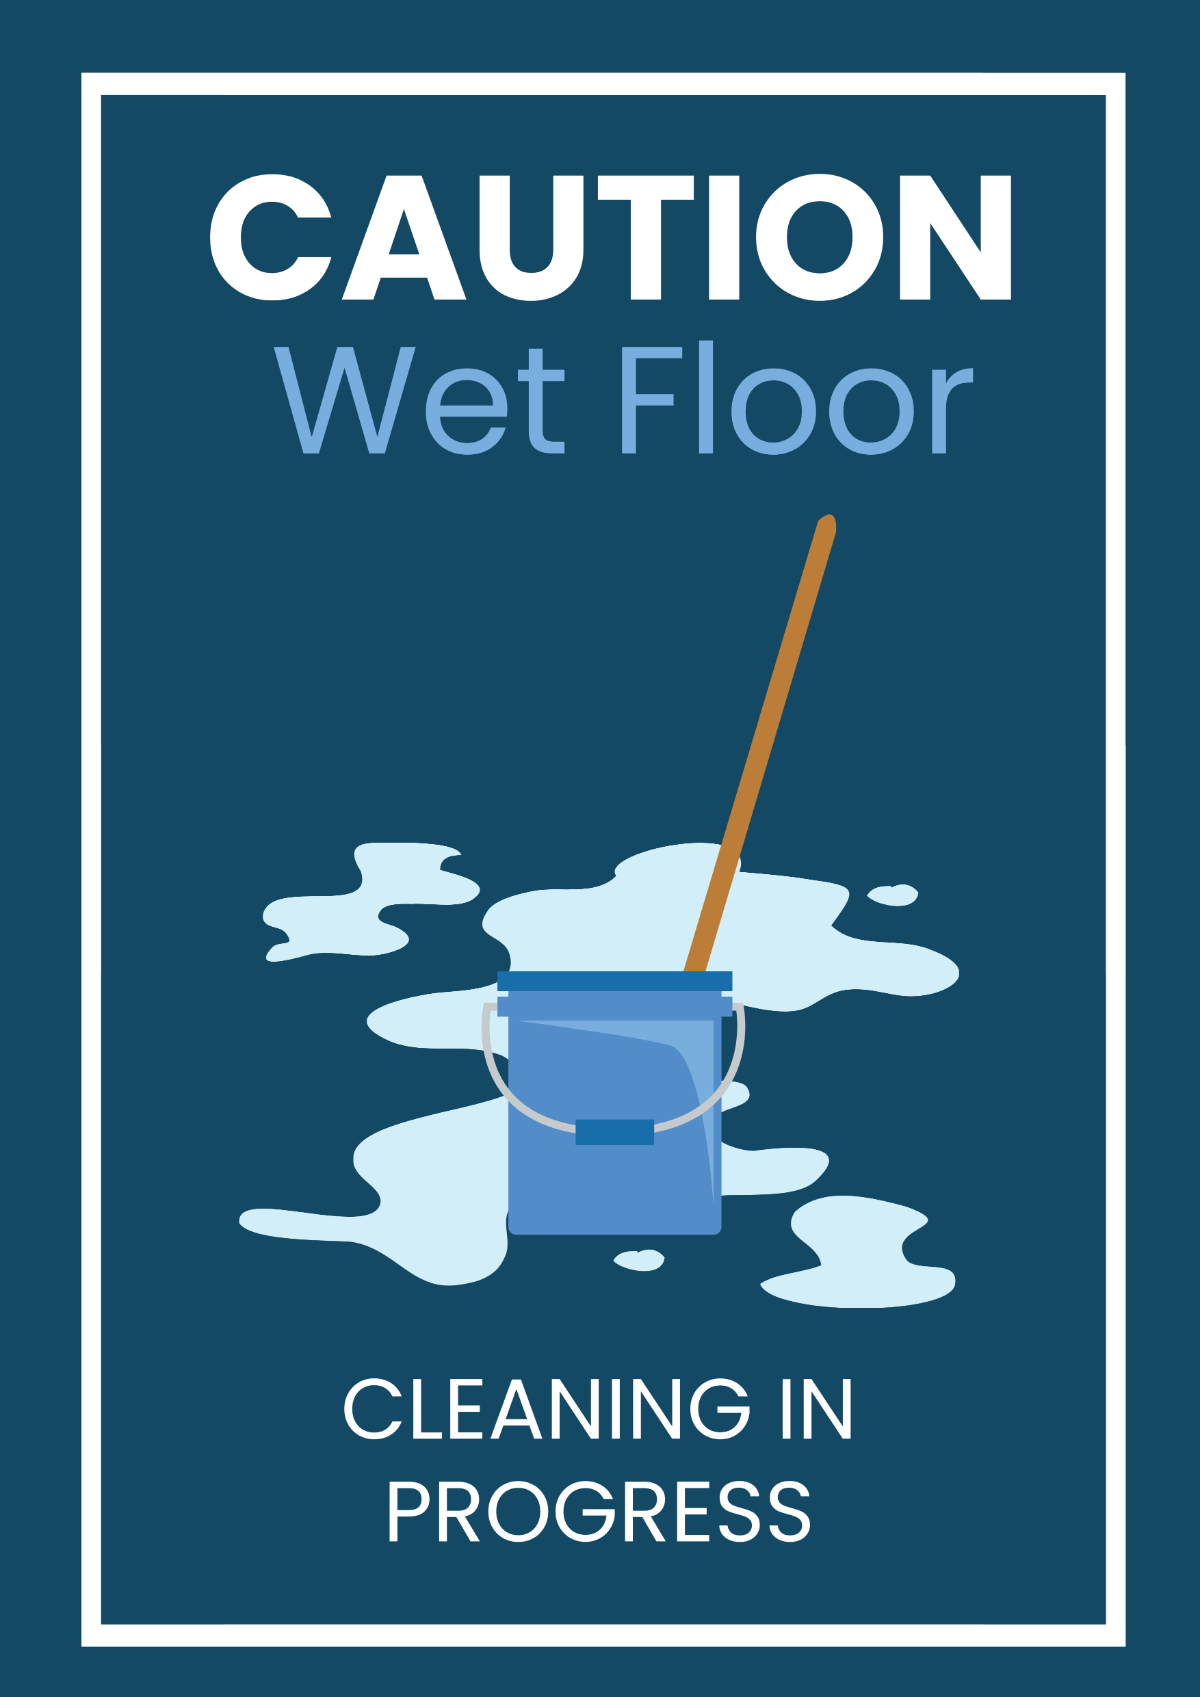 Cleaning Crew In Progress Warning Sign Template